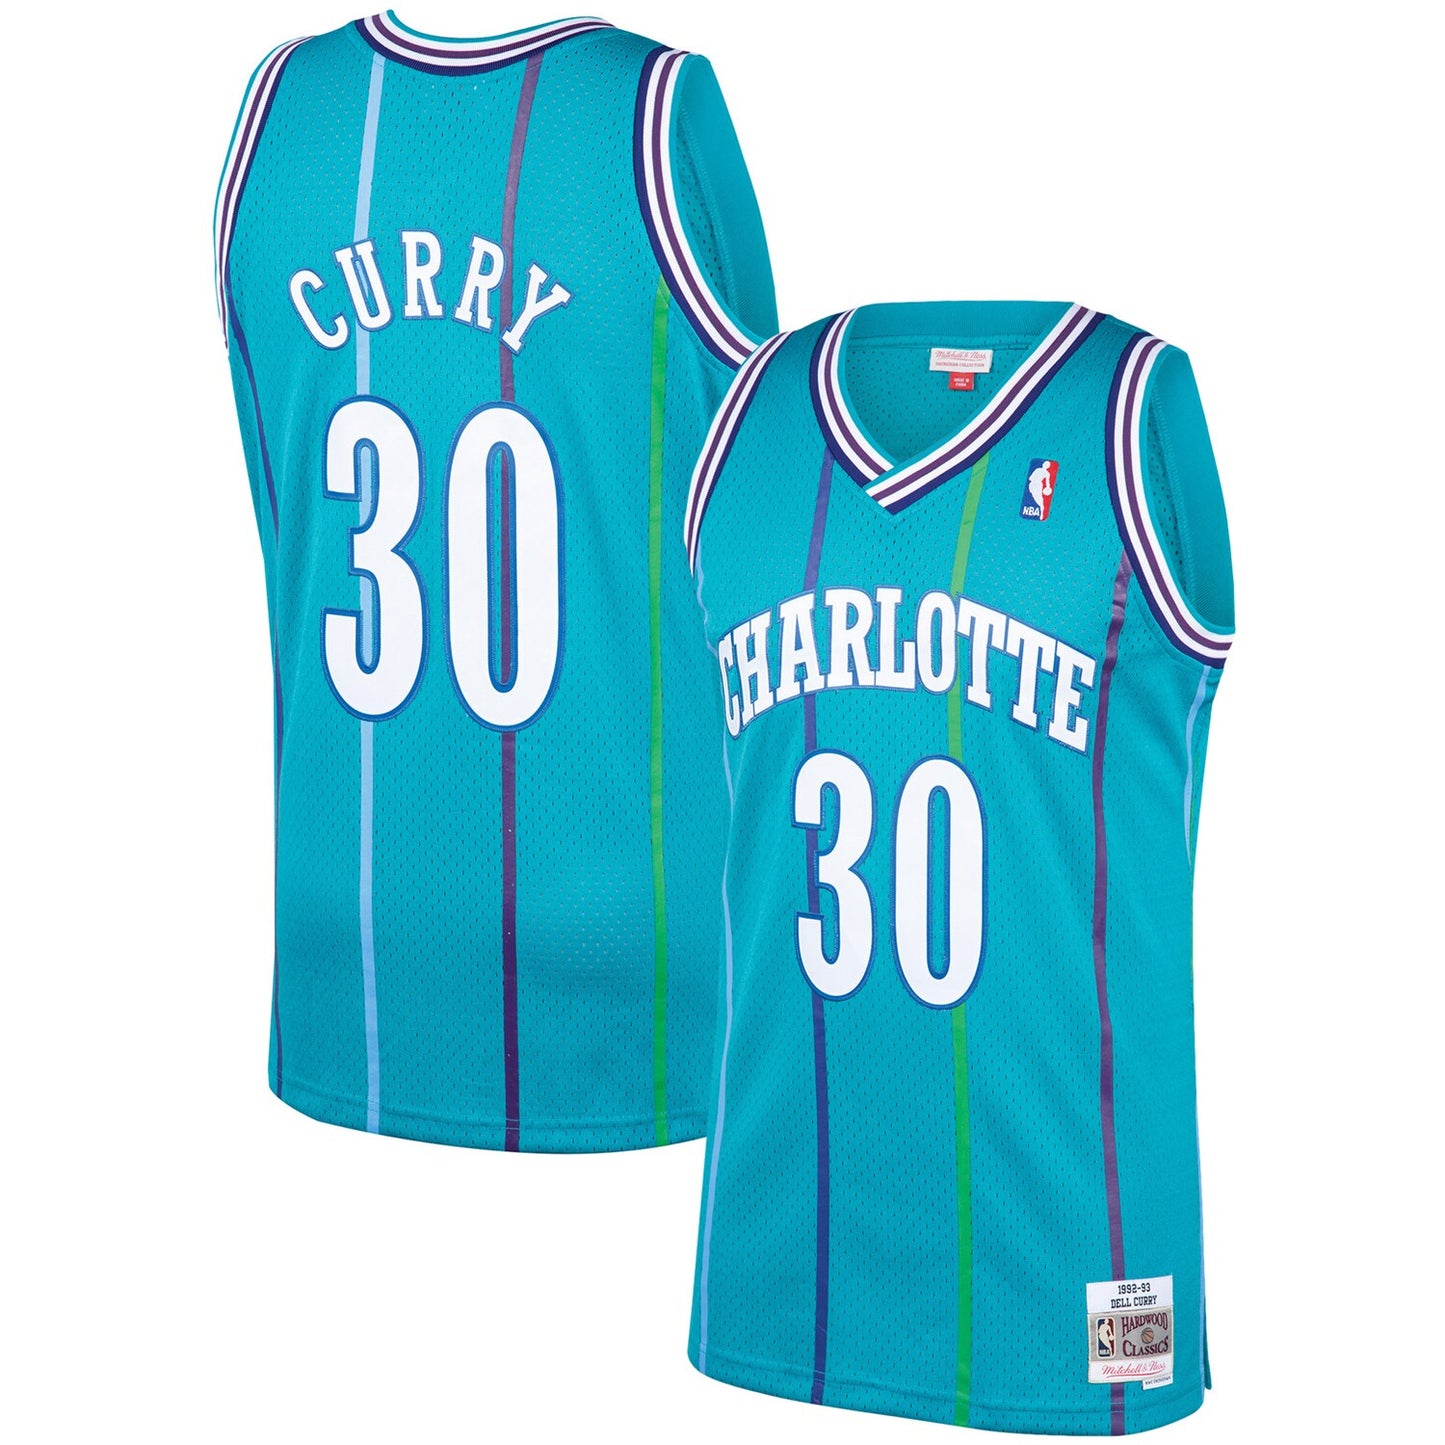 Dell Curry Charlotte Hornets Mitchell & Ness Hardwood Classics Swingman Jersey - Teal